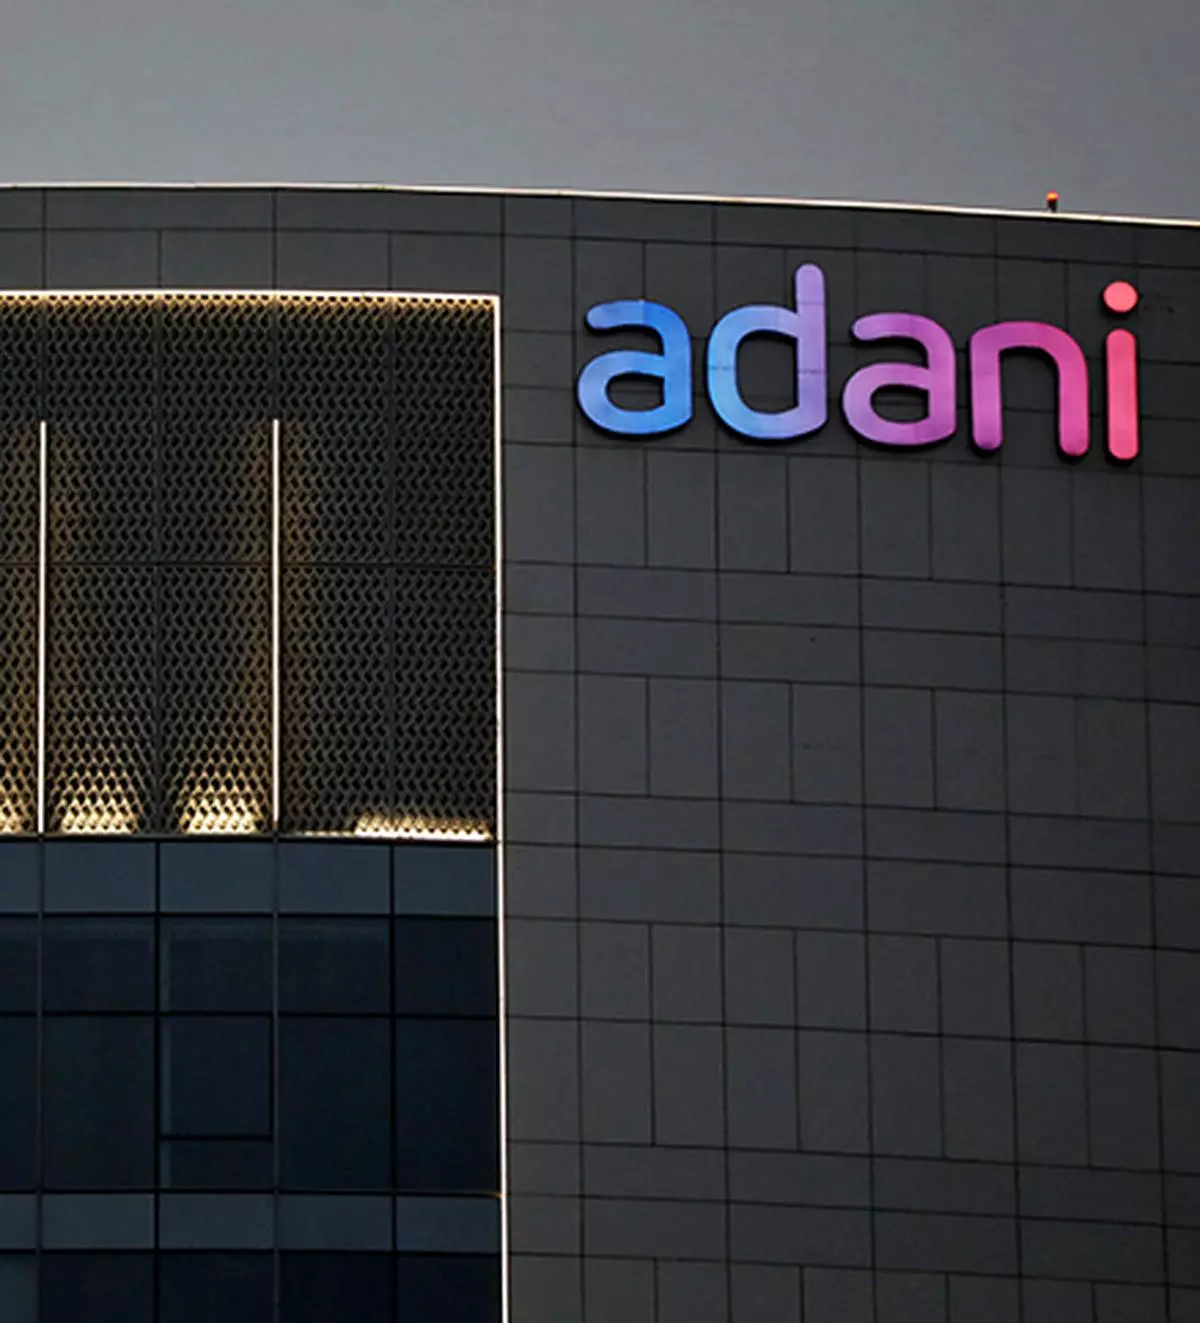 The logo of the Adani Group.